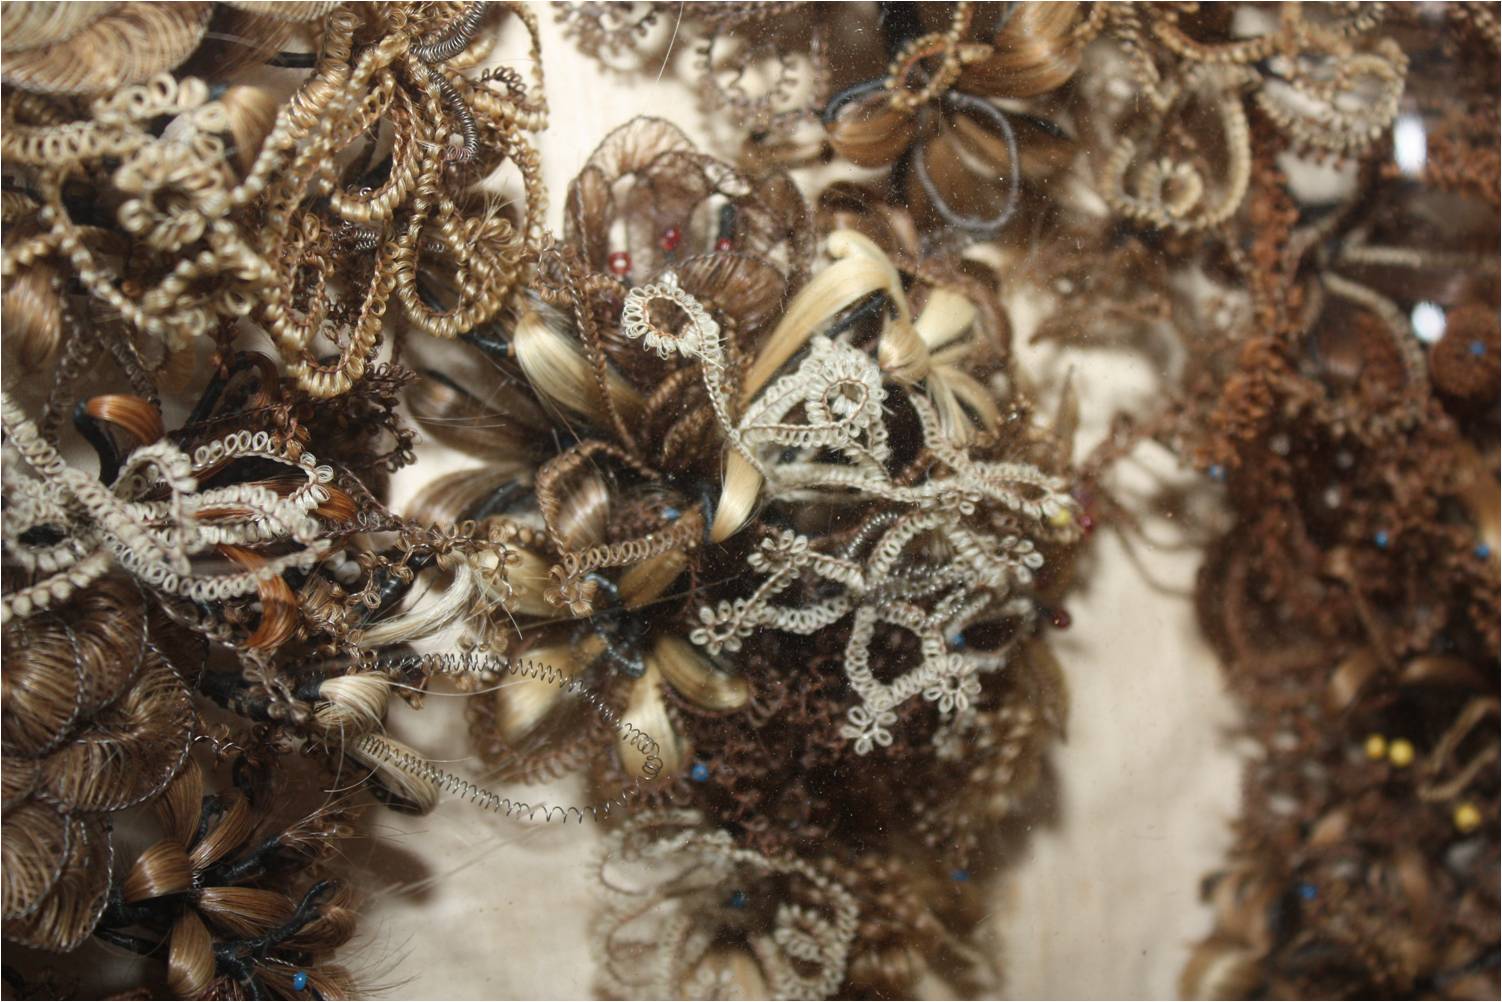 Hair wreath, collection of Prairie Trails Museum in Wayne County, Iowa